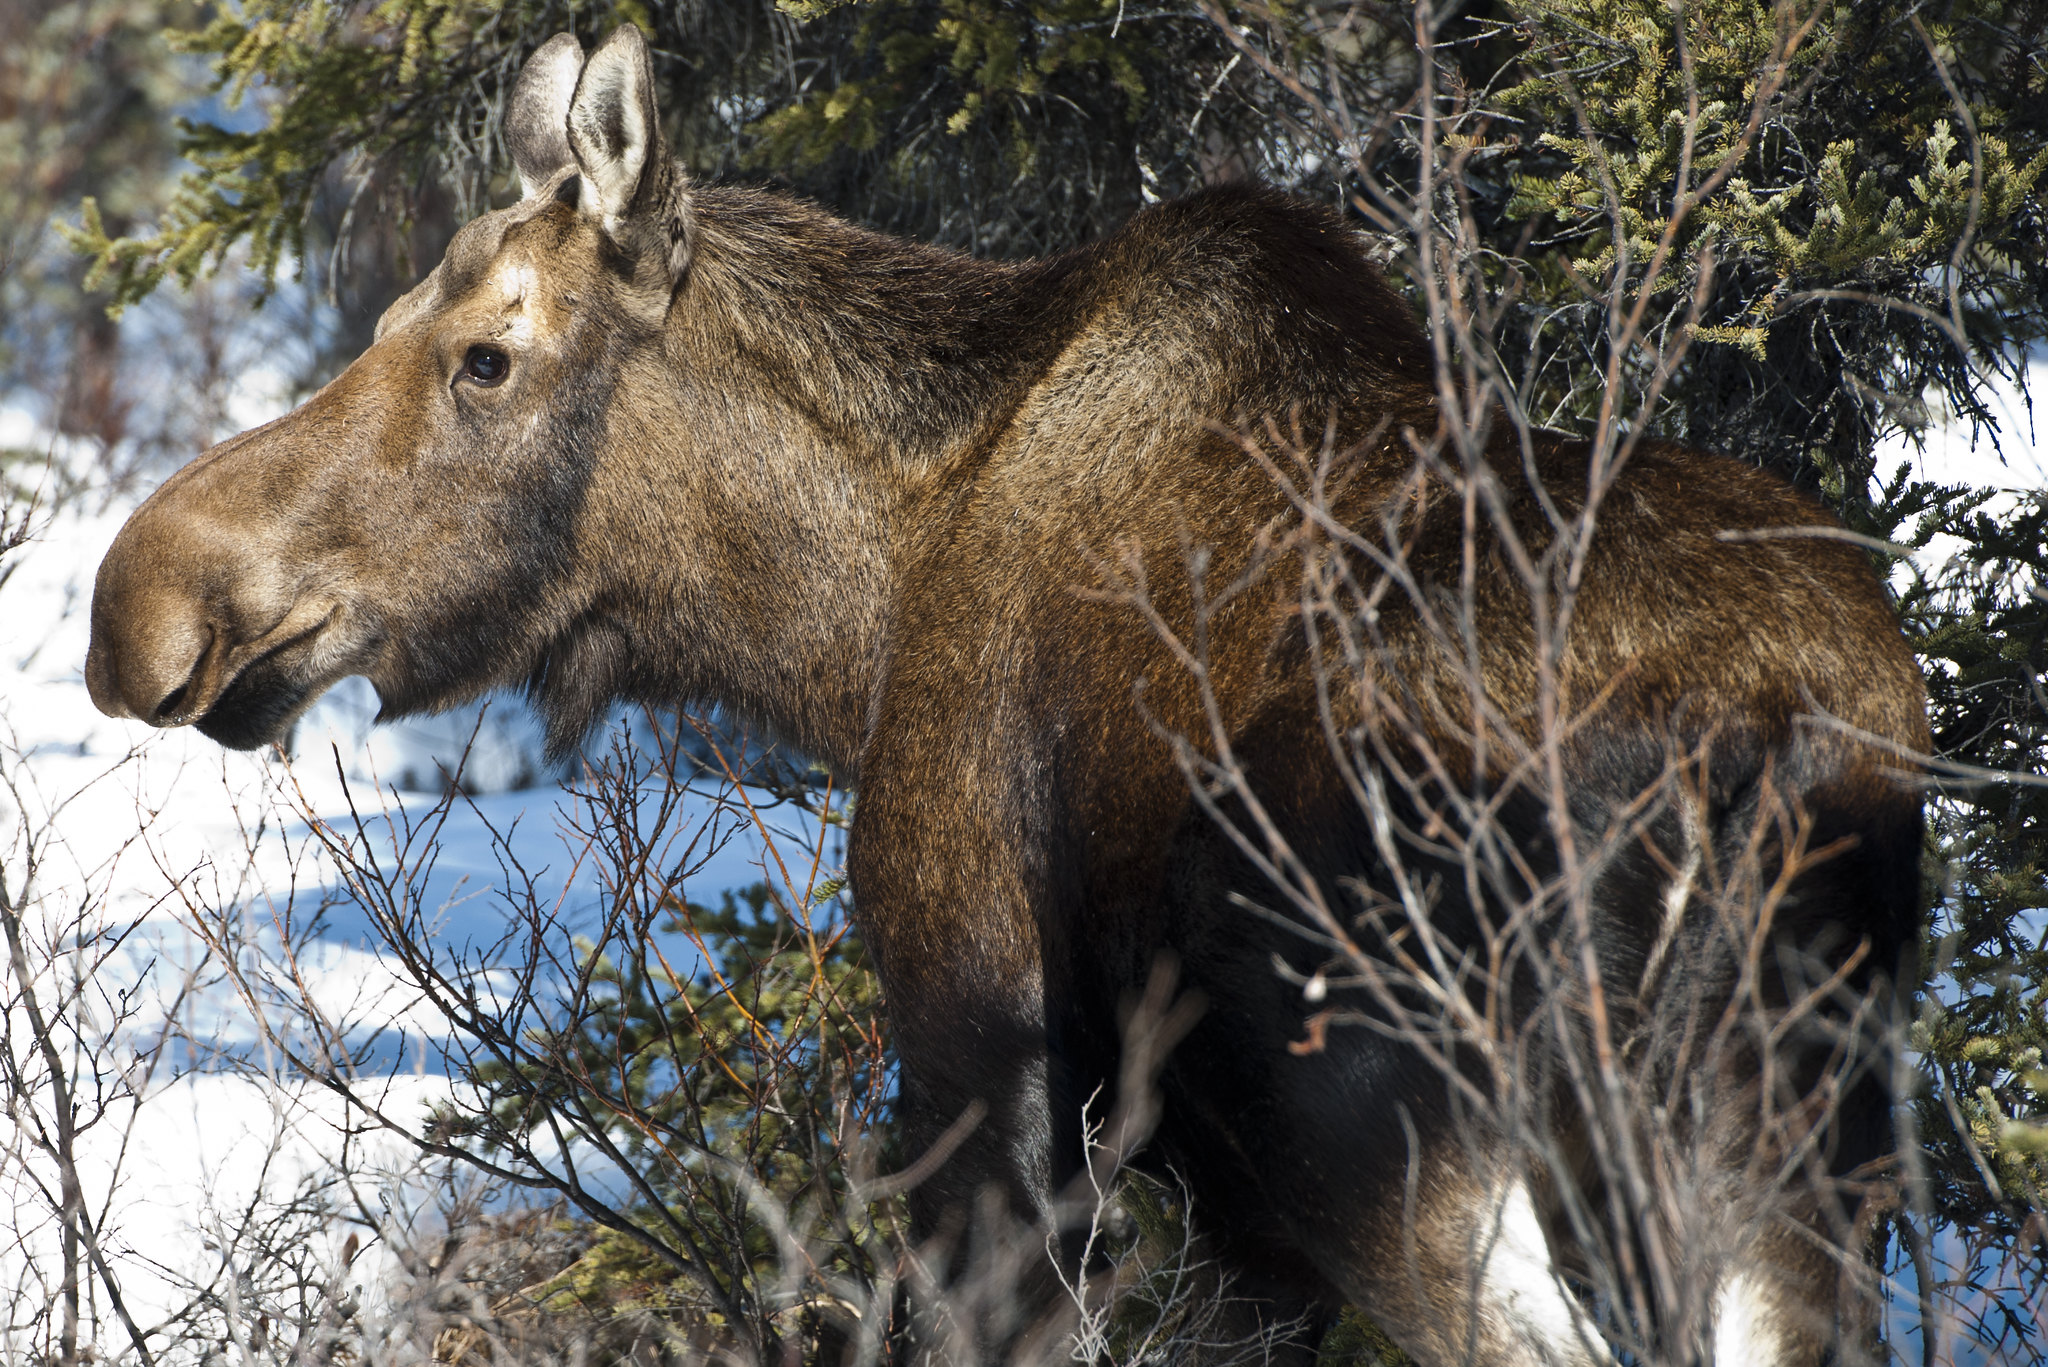 Idaho Woman Hospitalized After Being Knocked Unconscious by a Moose in Her Driveway